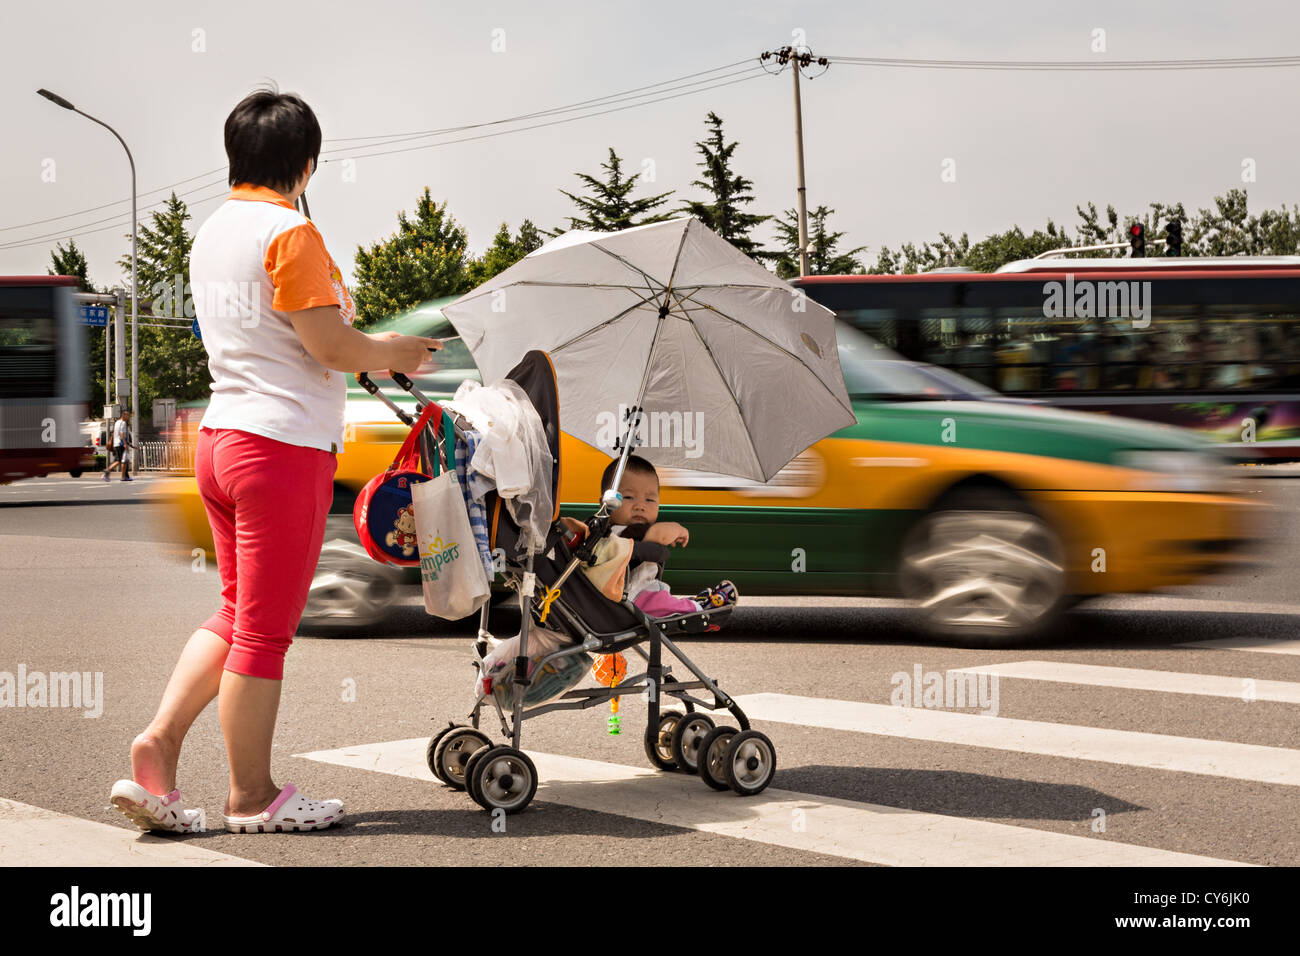 A Chinese woman pushing a baby carriage waits for traffic to cross a busy road during summer in Beijing, China Stock Photo